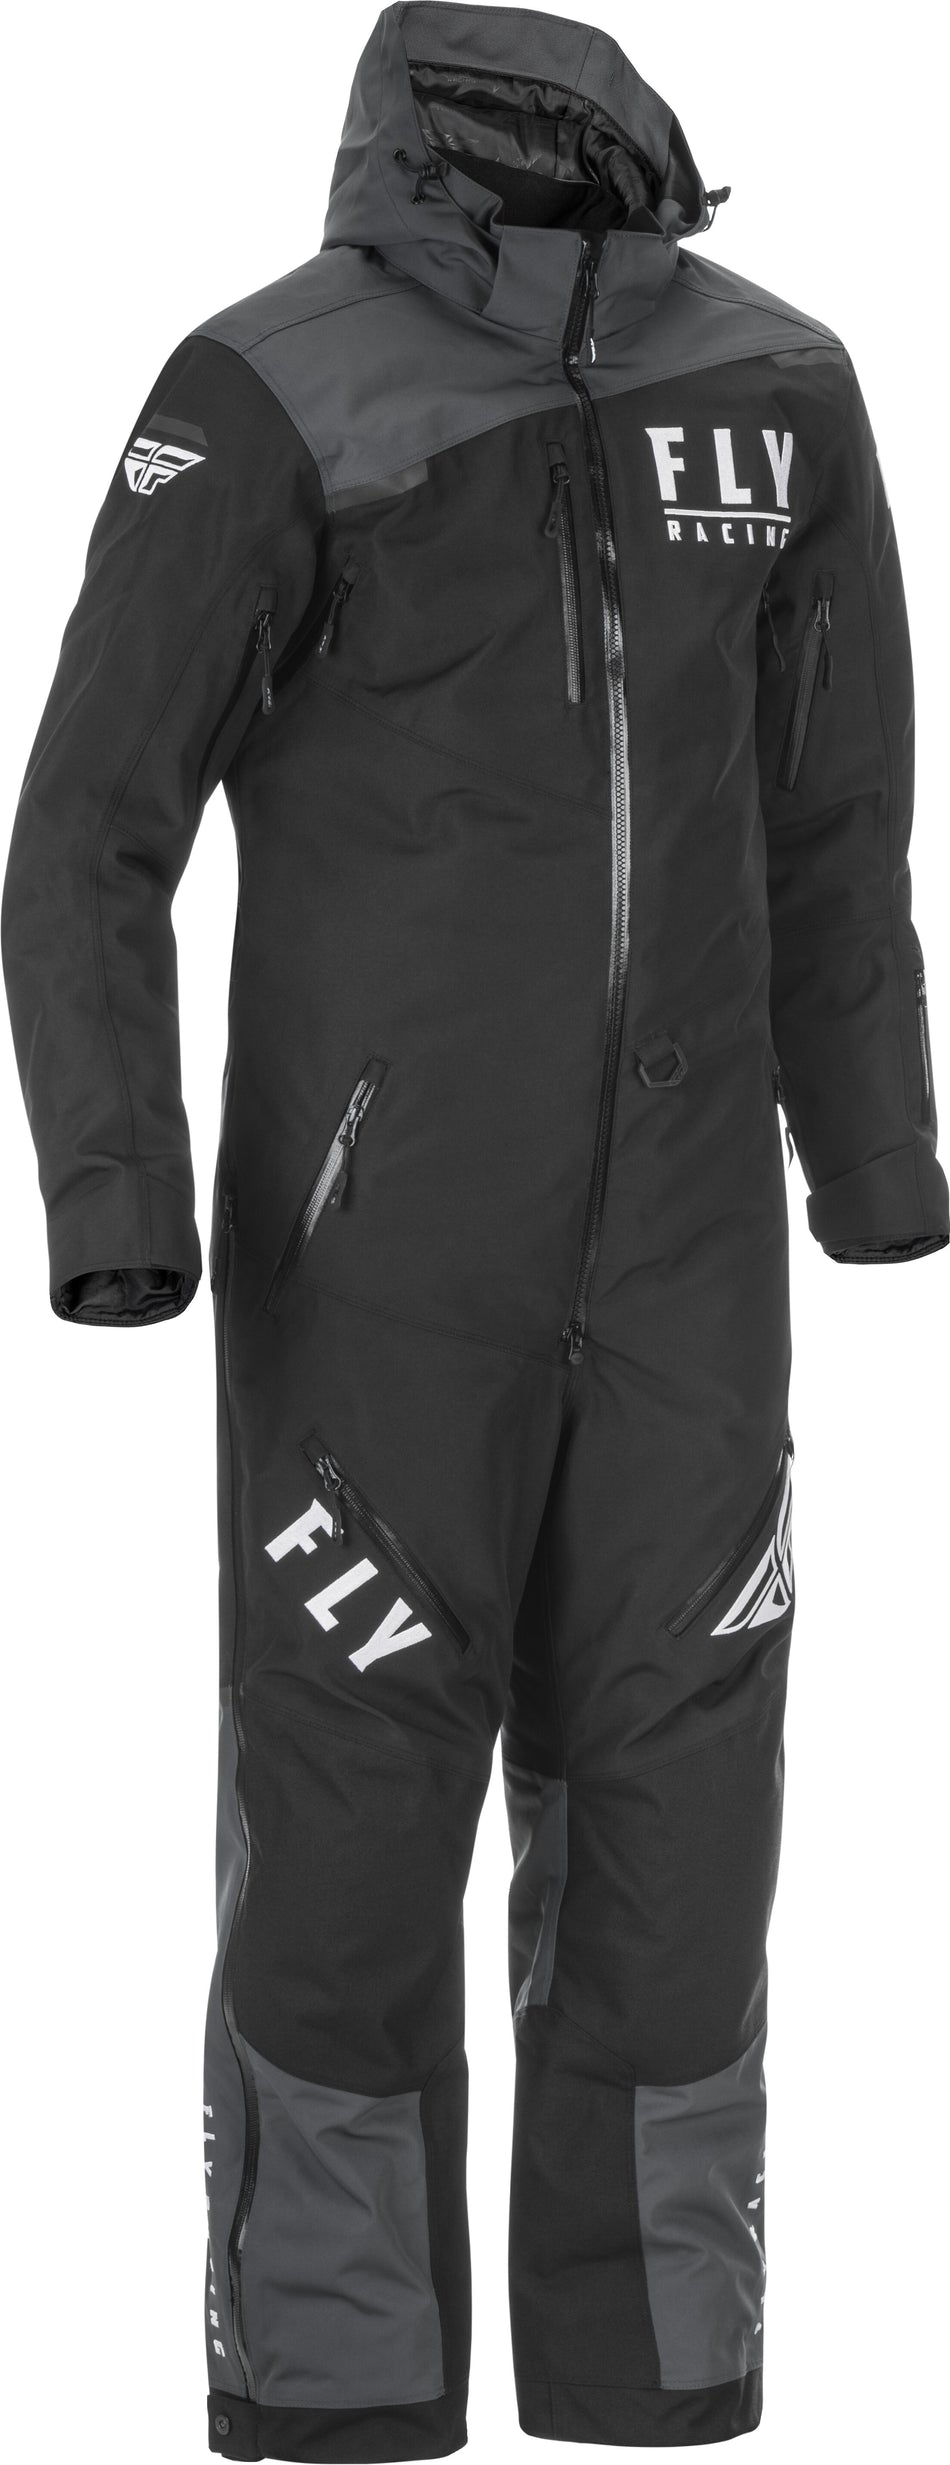 FLY RACING Cobalt Monosuit Insulated Black/Grey Md 470-4150M